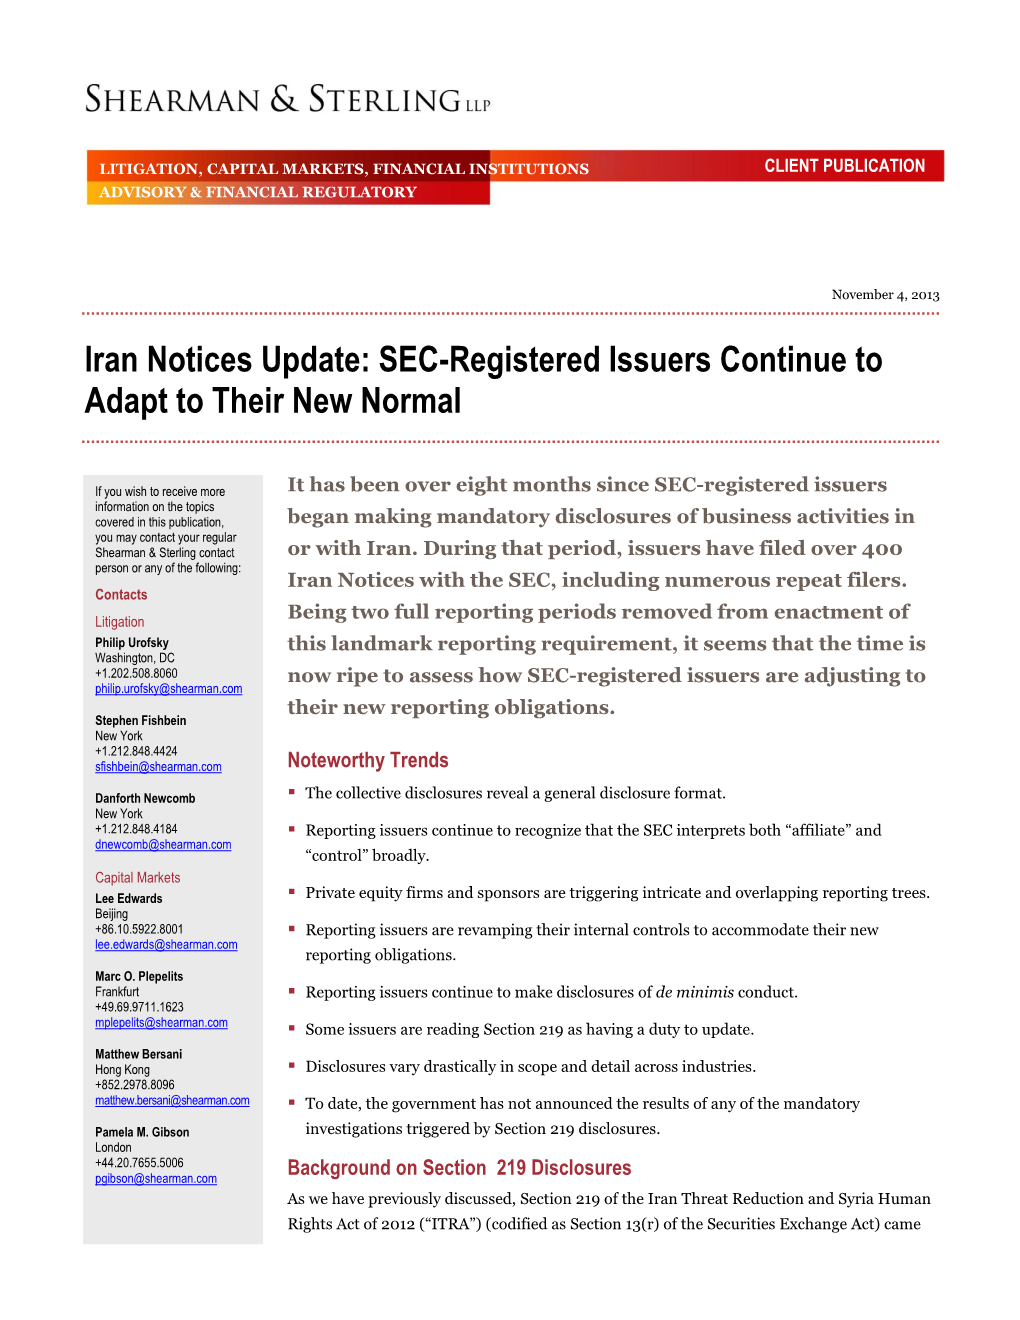 Iran Notices Update: SEC Registered Issuers Continue to Adapt to Their